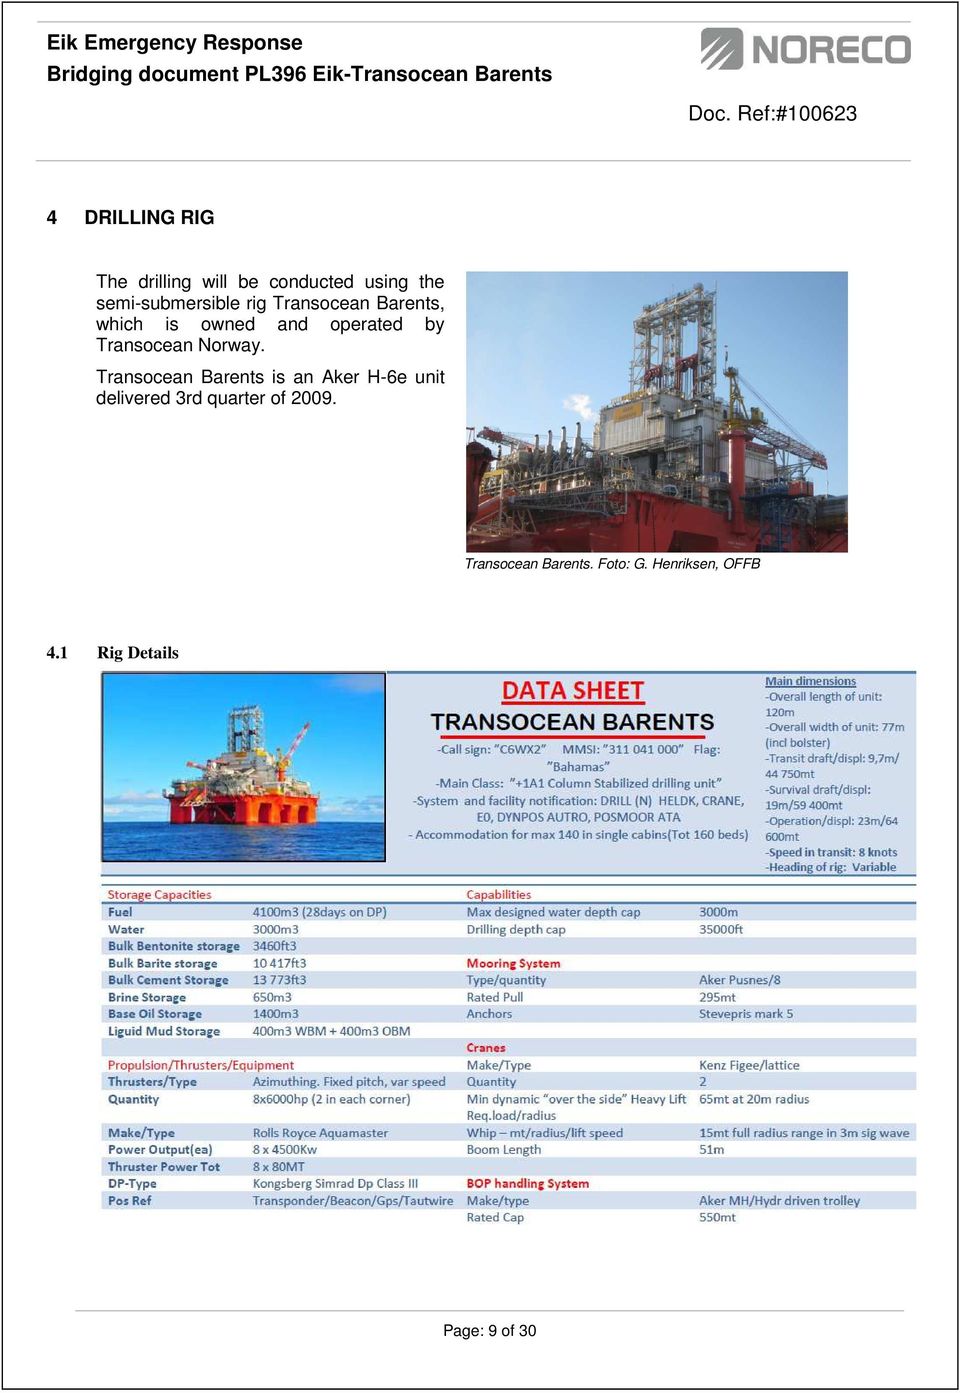 Transocean Barents is an Aker H-6e unit delivered 3rd quarter of 2009.